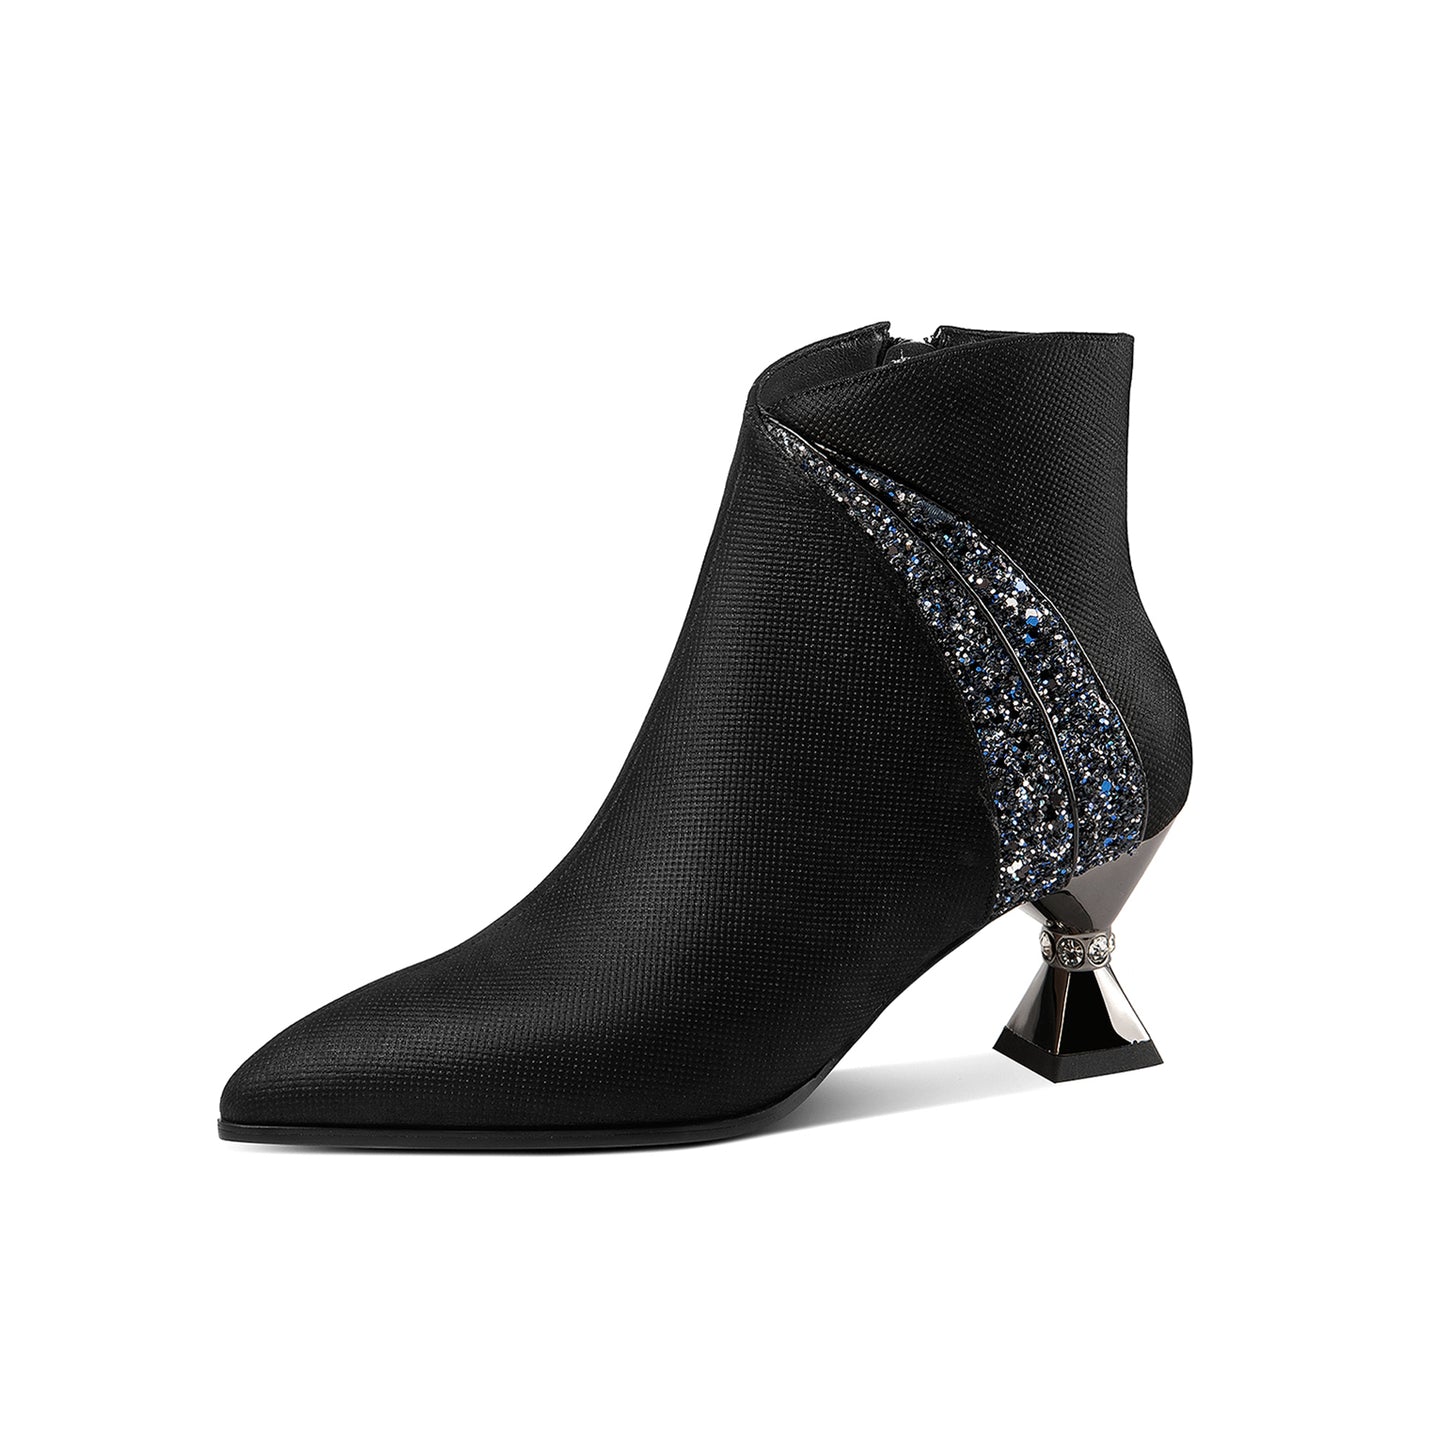 TinaCus Handmade Women's Genuine Leather Rhinestones Woven Design Pointed Toe Side Zipper Mid Spool Heel Ankle Boots